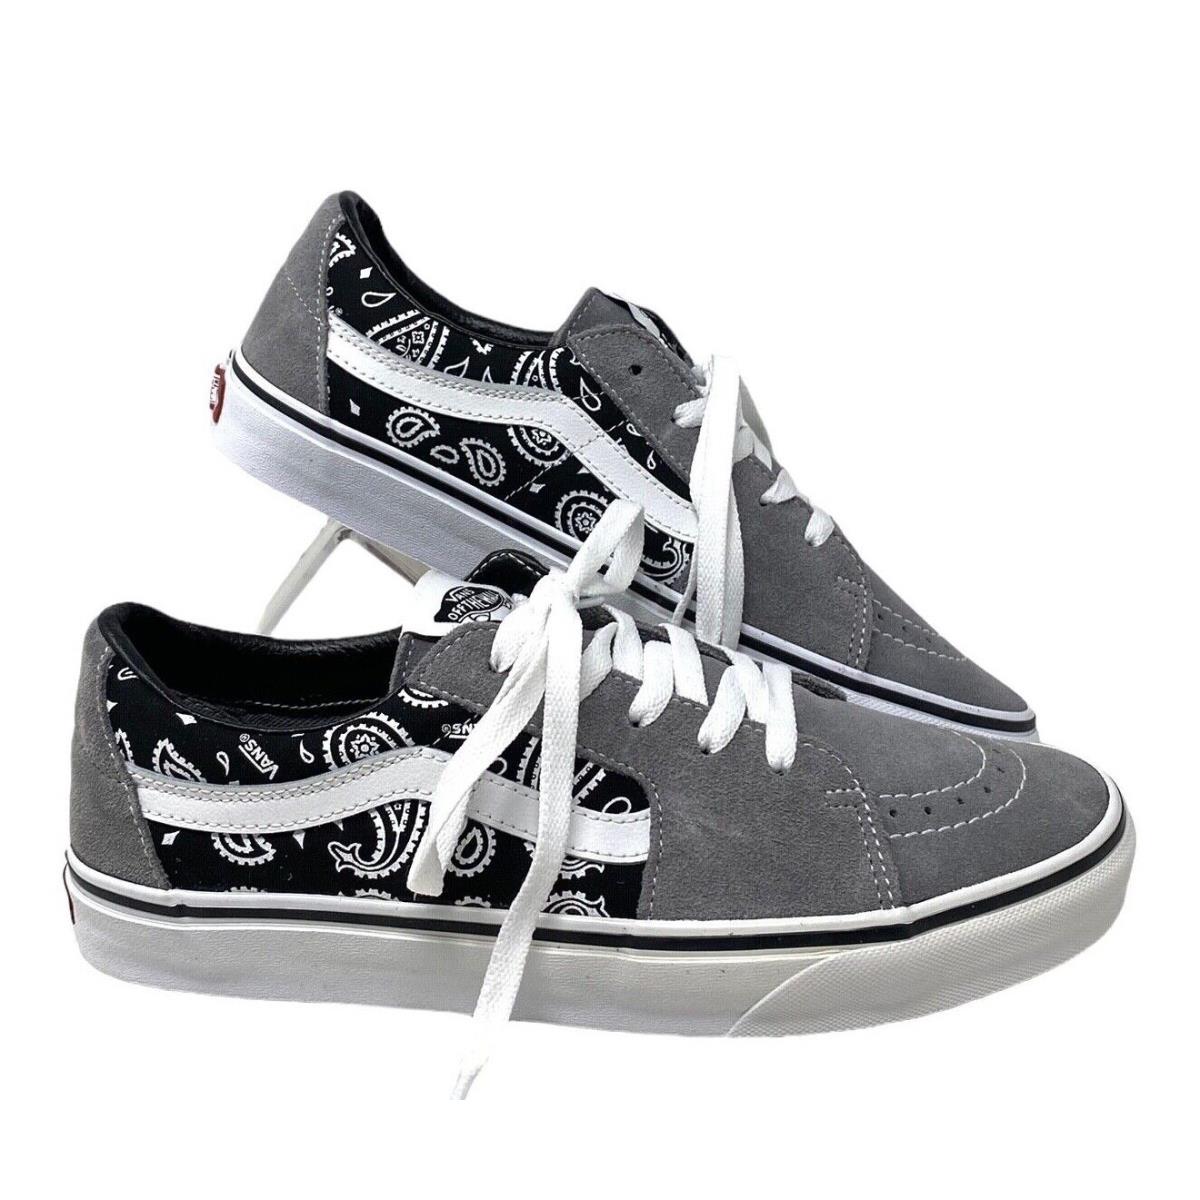 Vans Sk8-Low Shoe Paisley Gray Suede Casual Sneakers For Women Skate VN0A5KXDBGJ